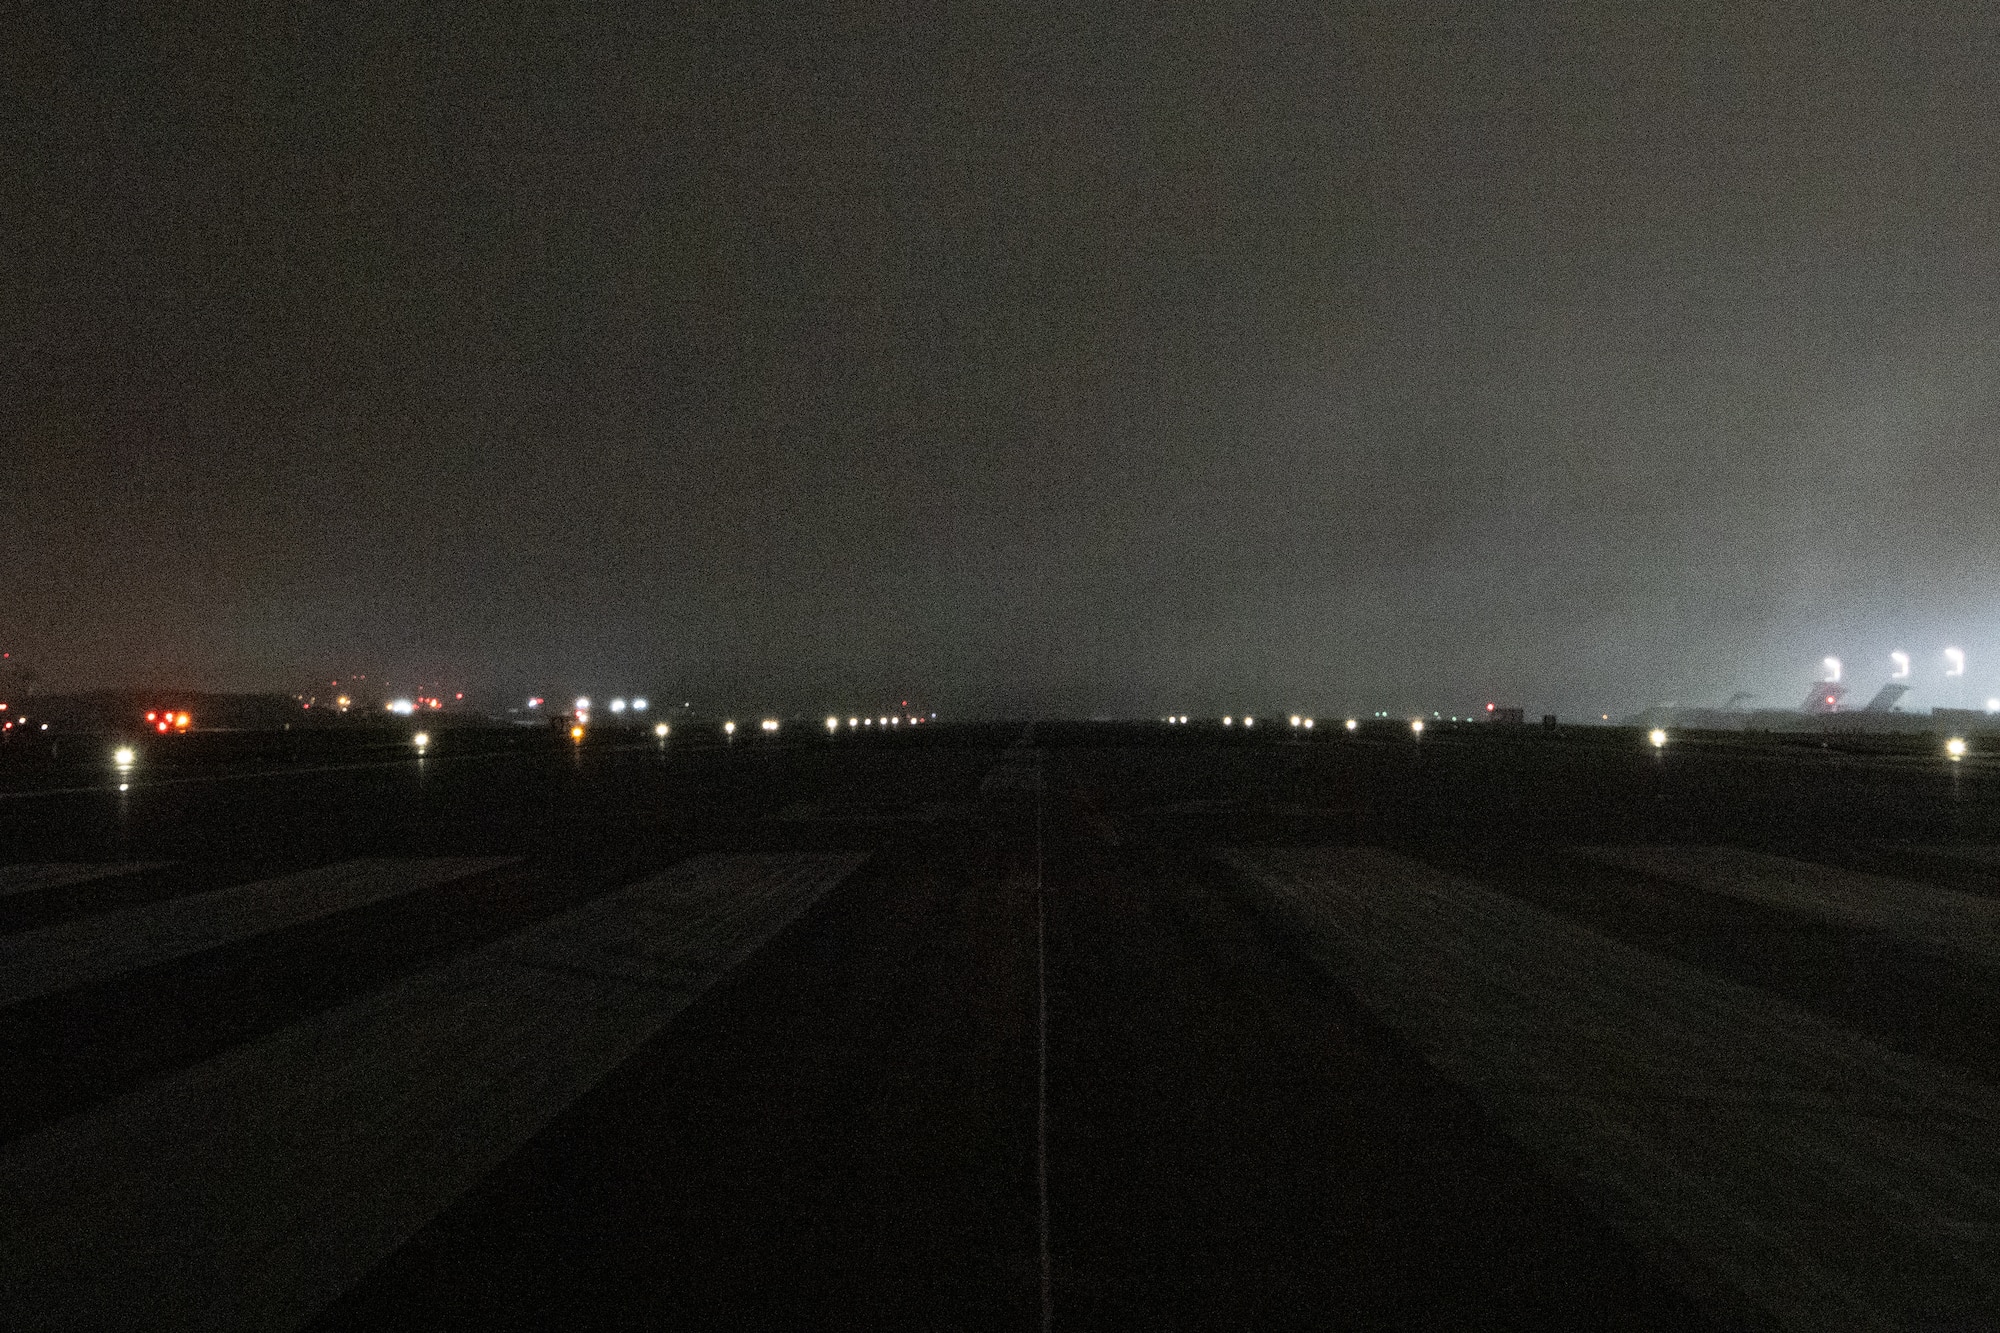 An airfield runway at night illuminated by lights along the edge.